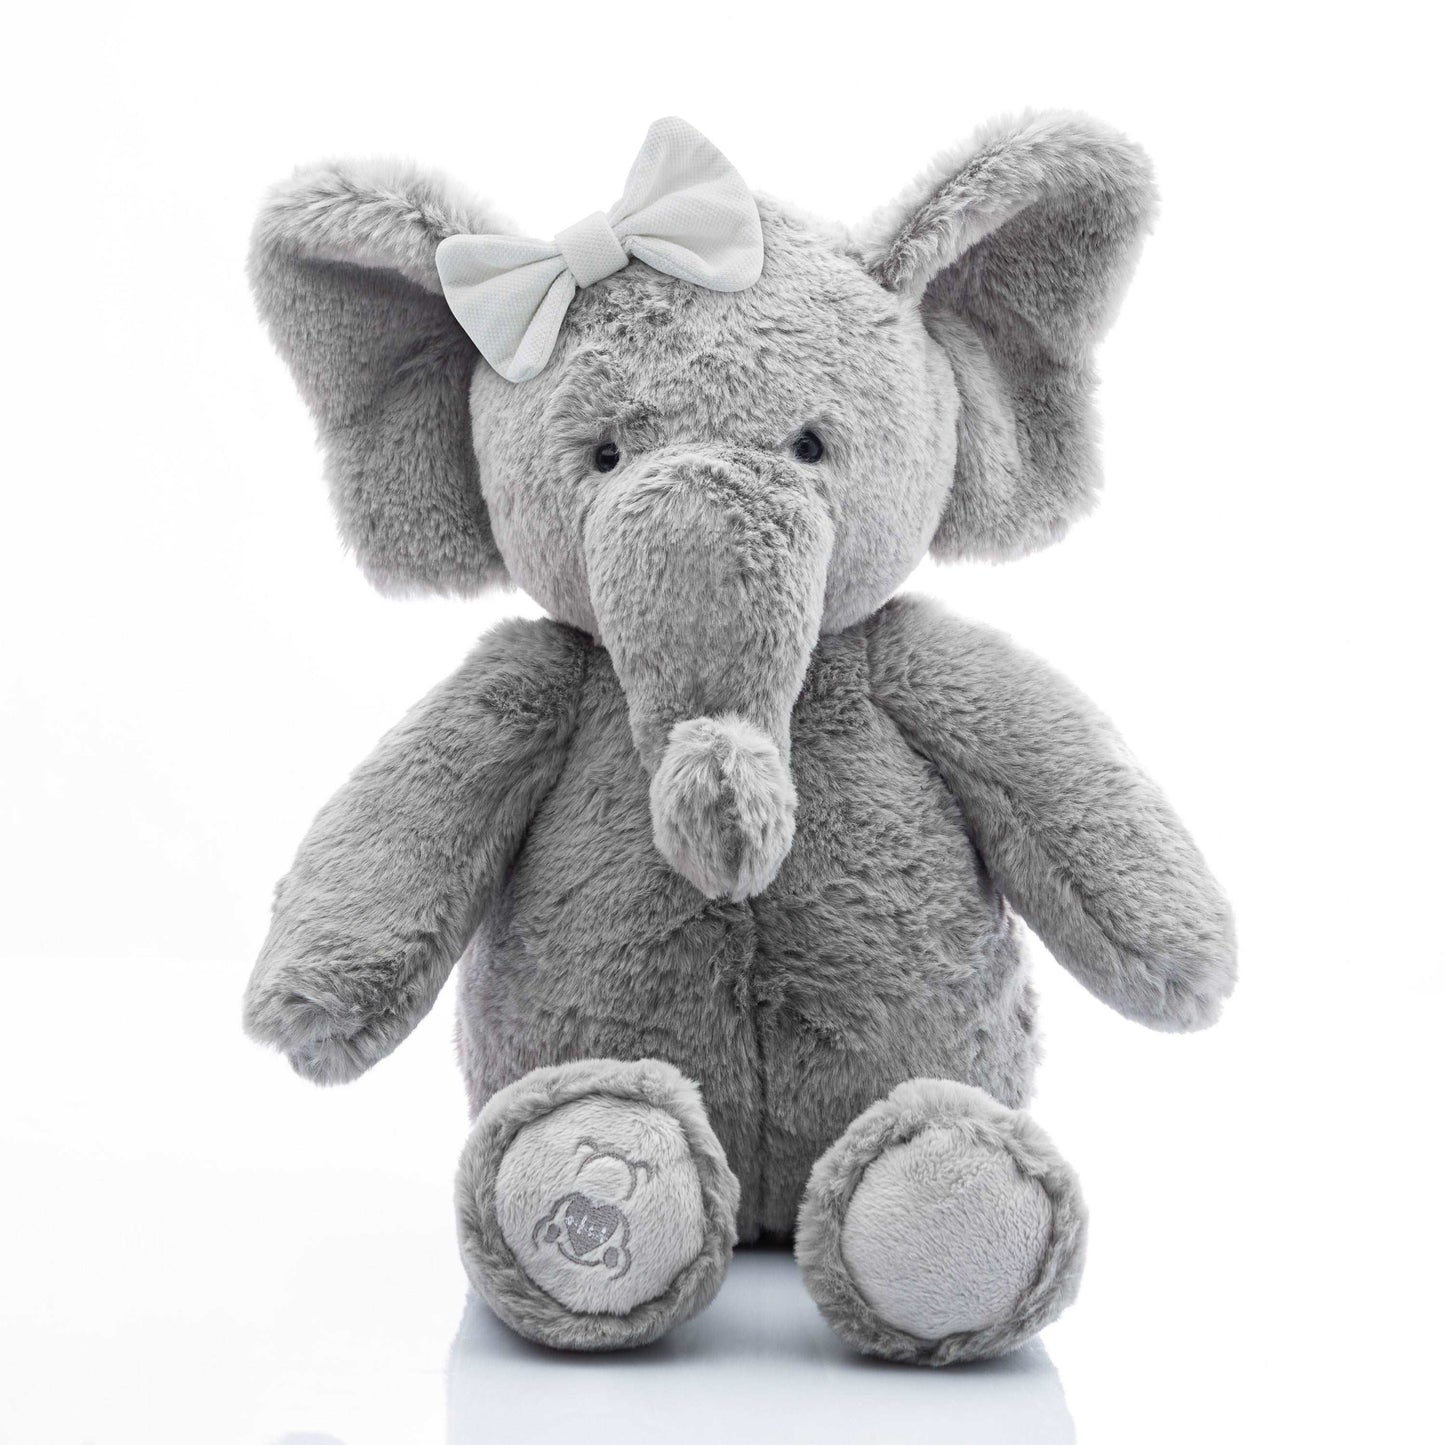 Tembo the Heartbeat Elephant (Includes 20 Second Heart Module)